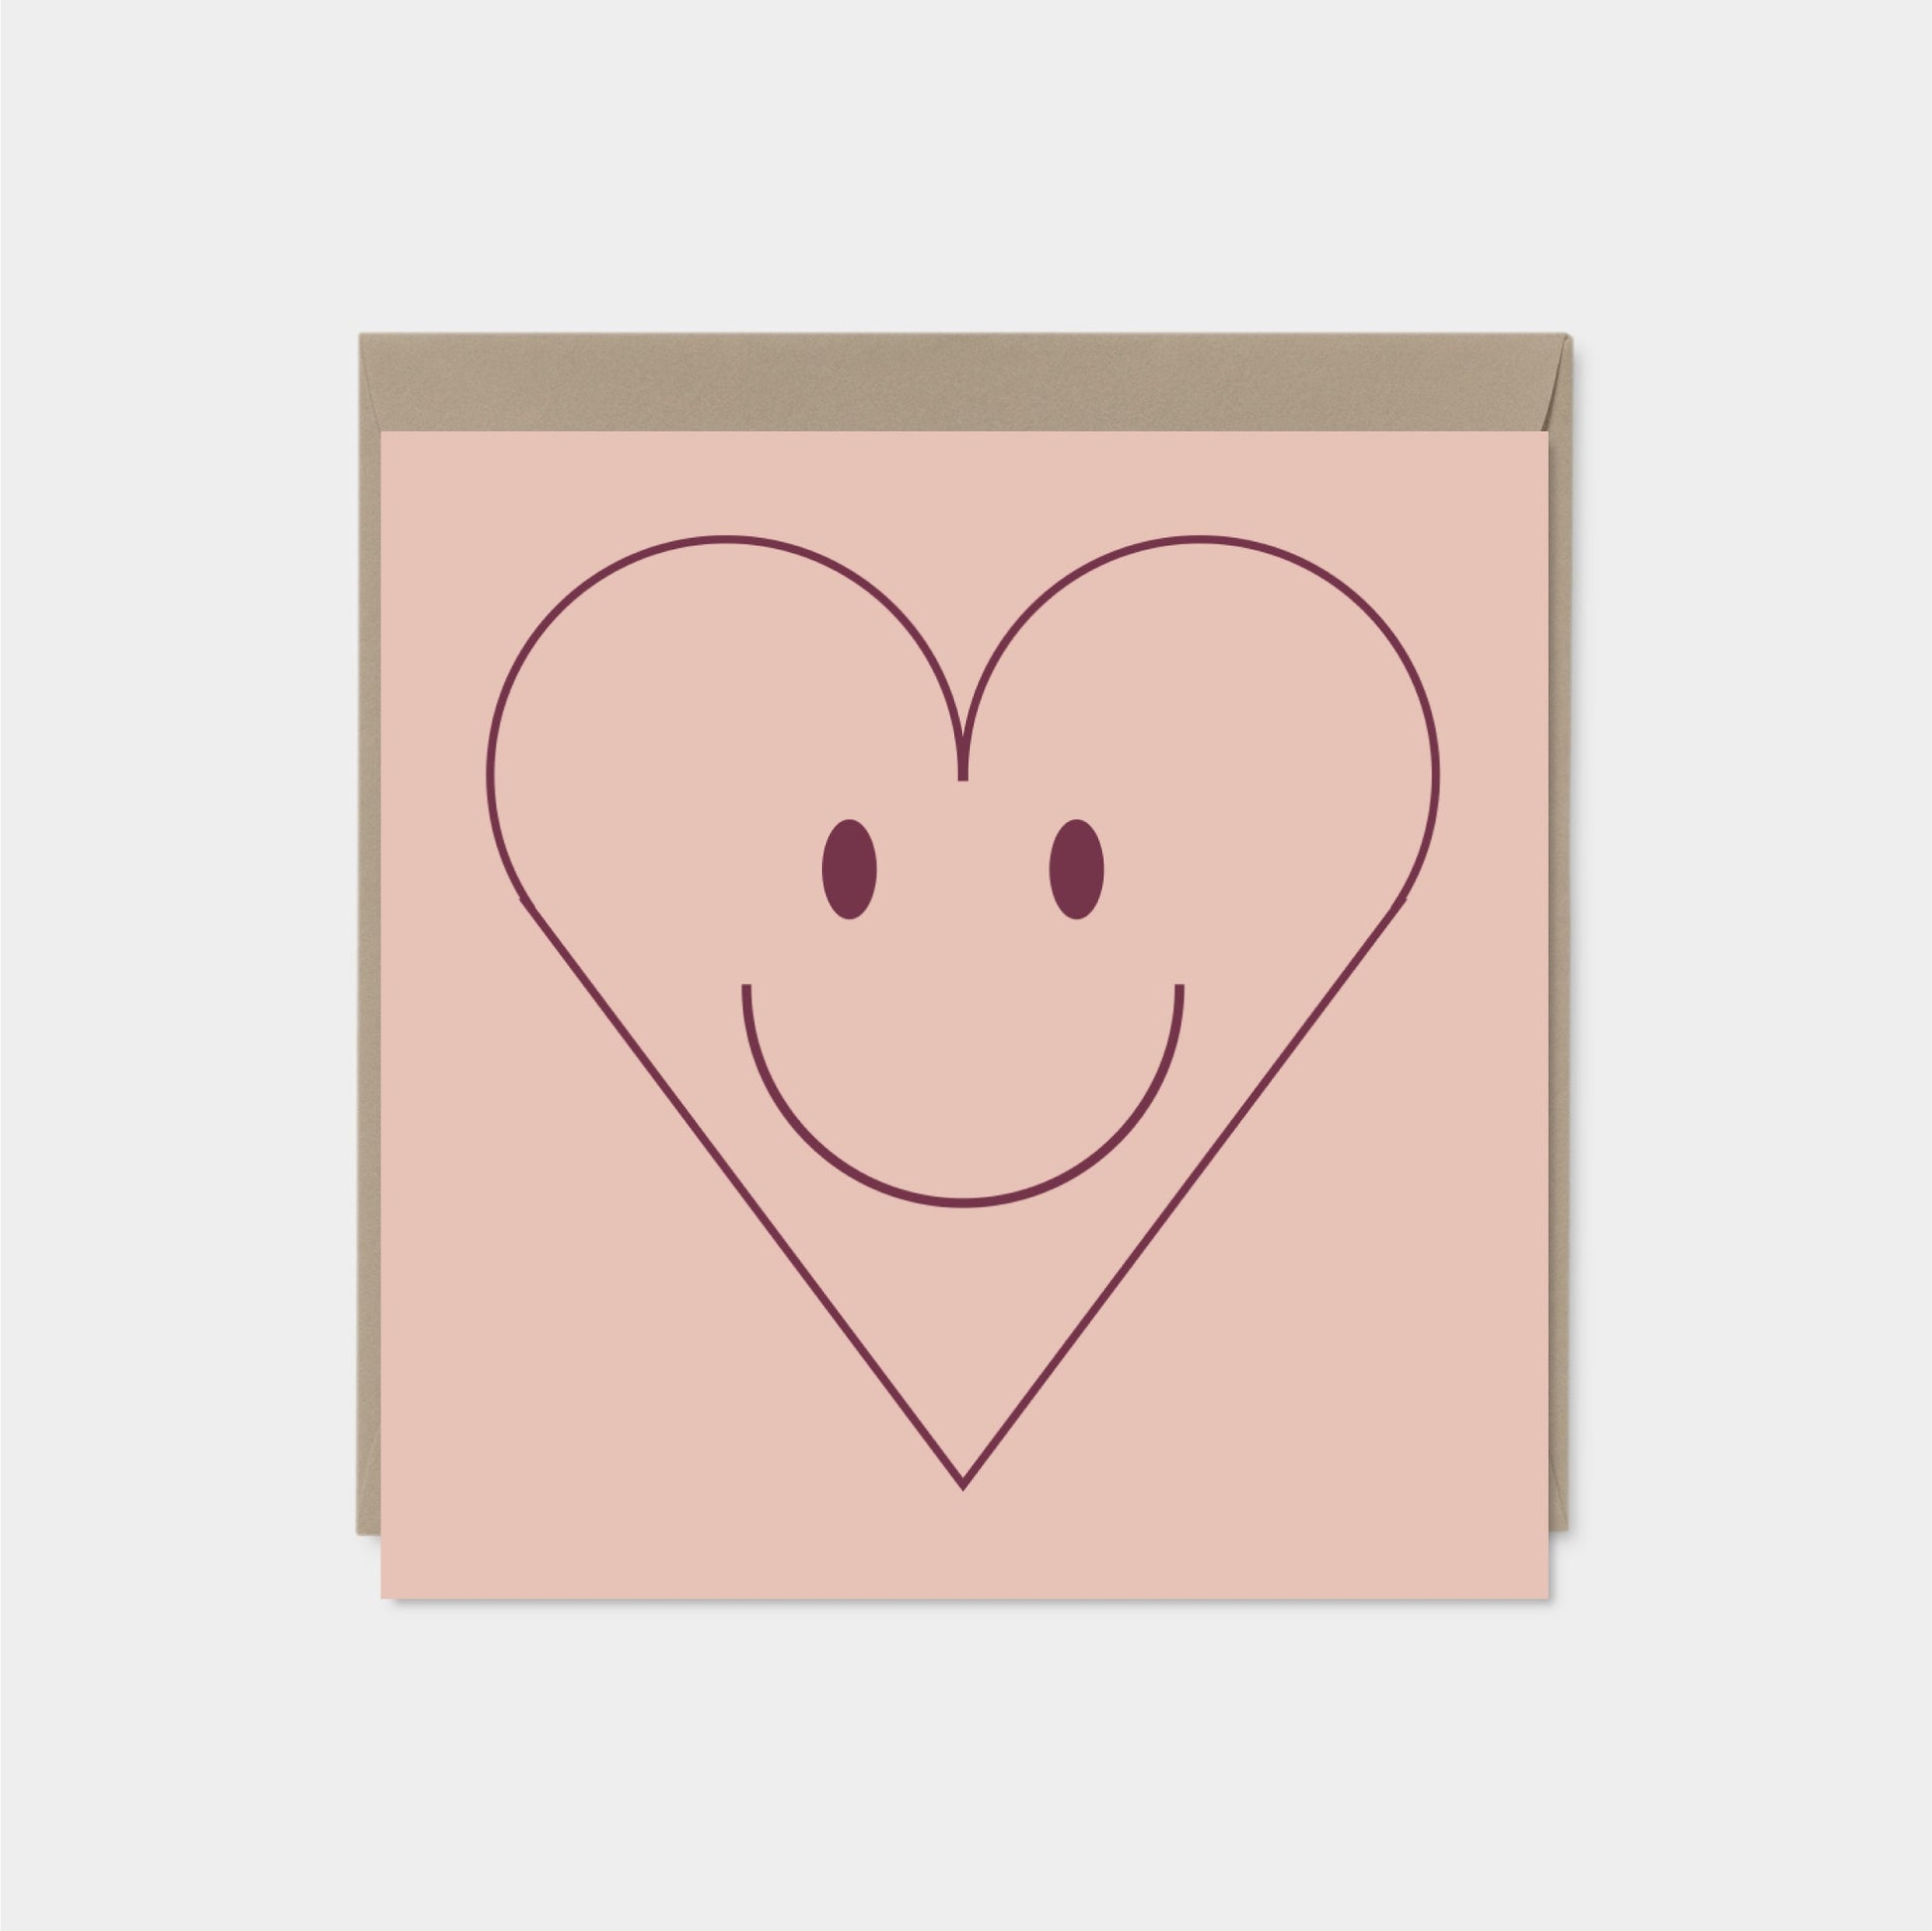 Smiley Heart Valentine's Day Card, Blank